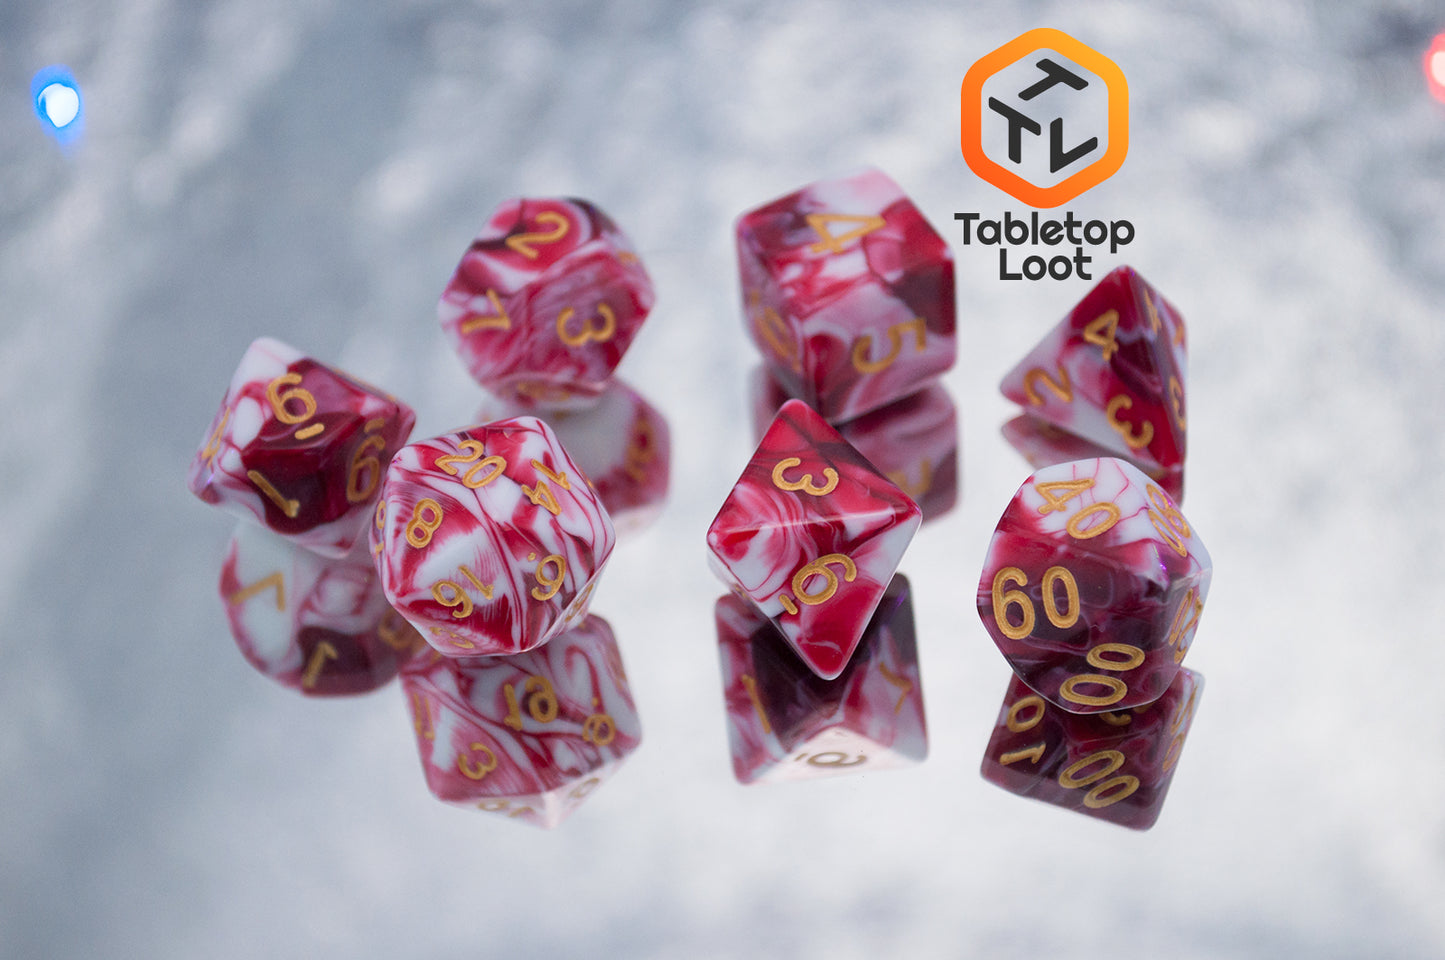 The Strawberry Sundae 7 piece dice set from Tabletop Loot with swirls of red, pink, and white and gold ink.